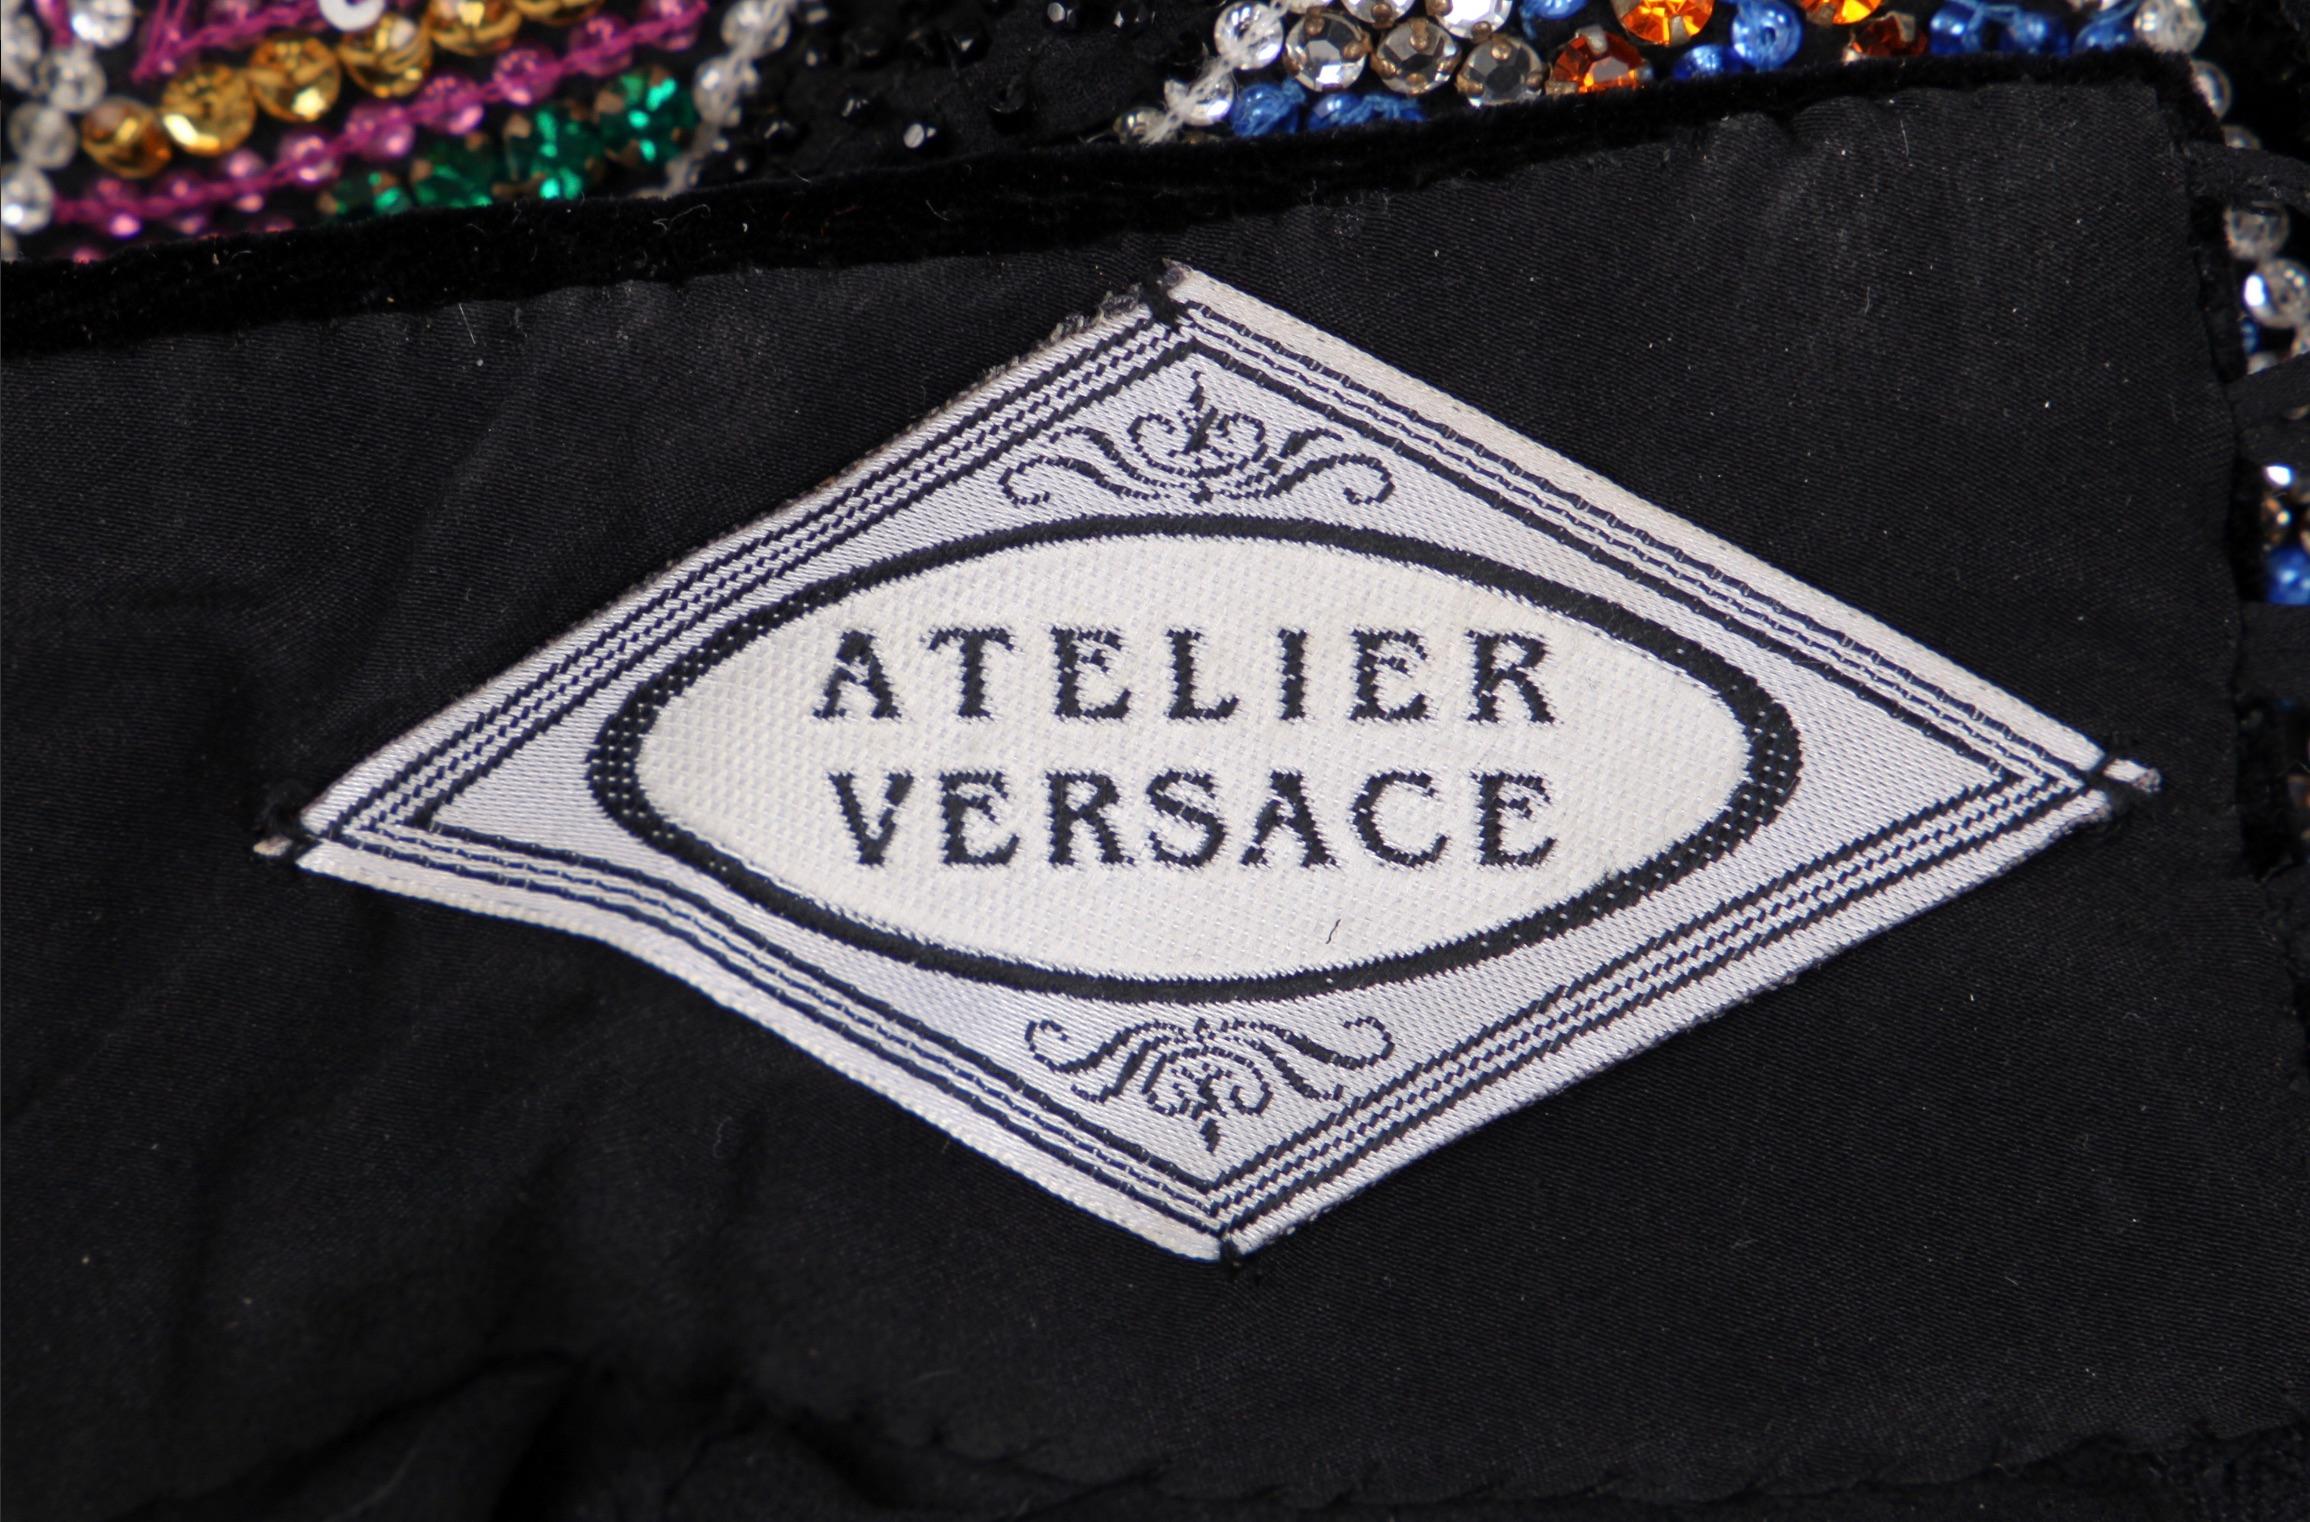 Gianni Versace couture beaded 'Java Forever' dress, Autumn-Winter 1989-90 2